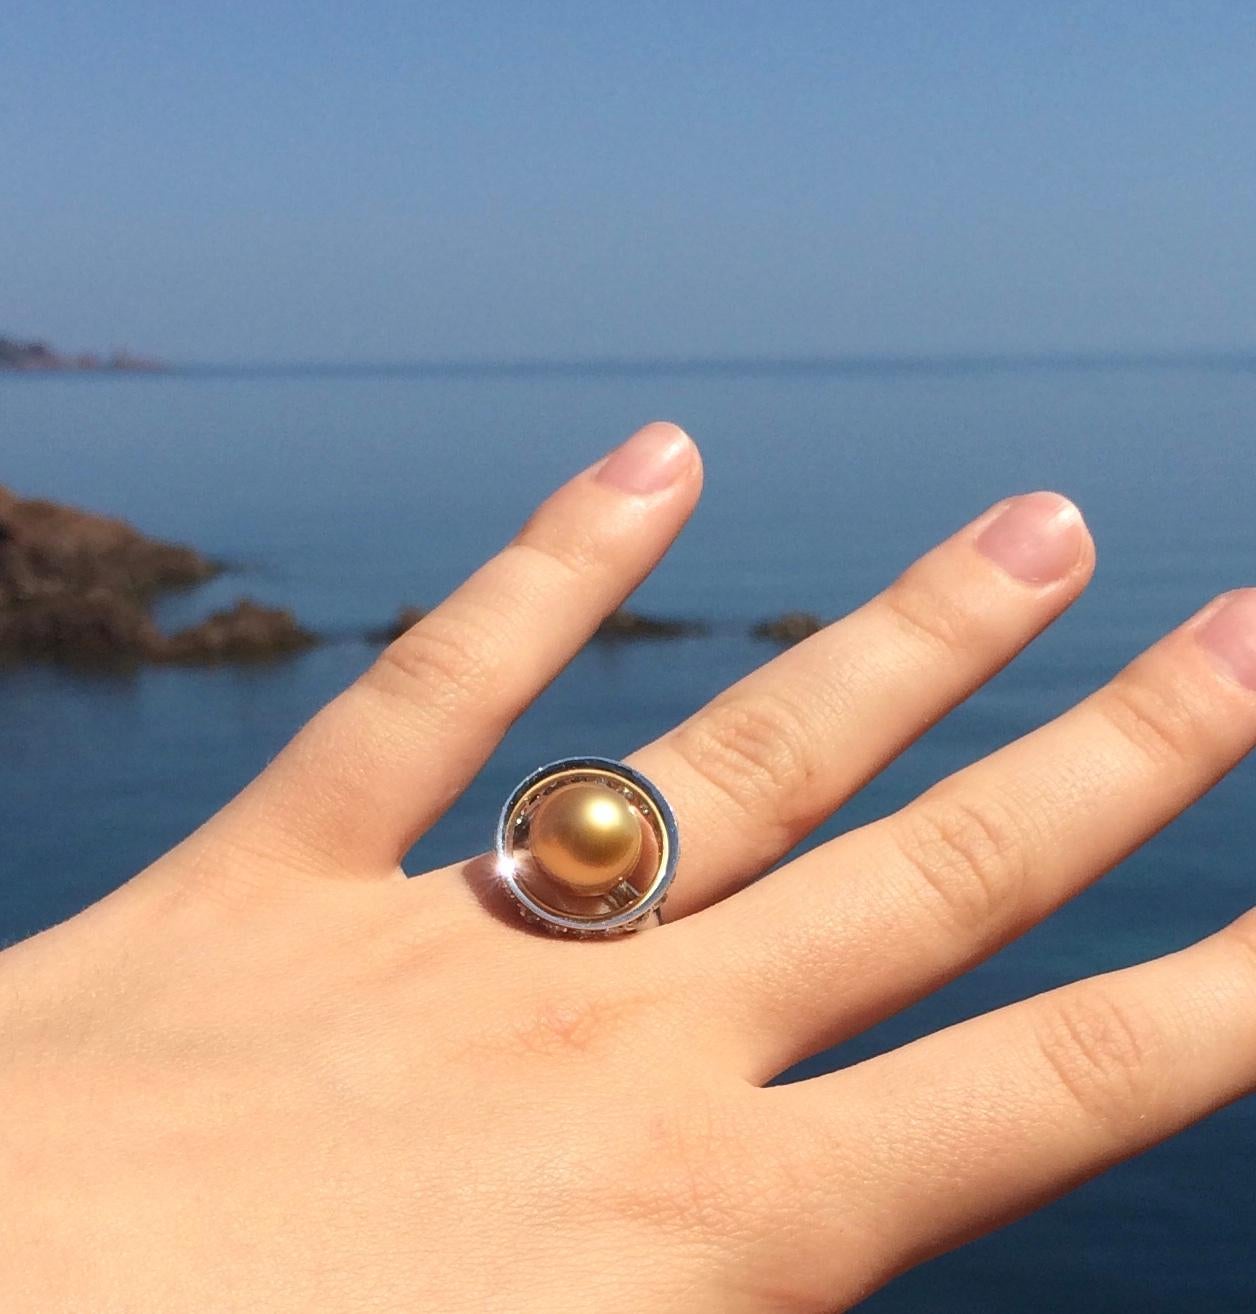 Ring Anne Bourat  One Gold Pearl  19 Diamonds 0, 96 cts  White Gold Mount 18K In New Condition For Sale In Paris, Île de France